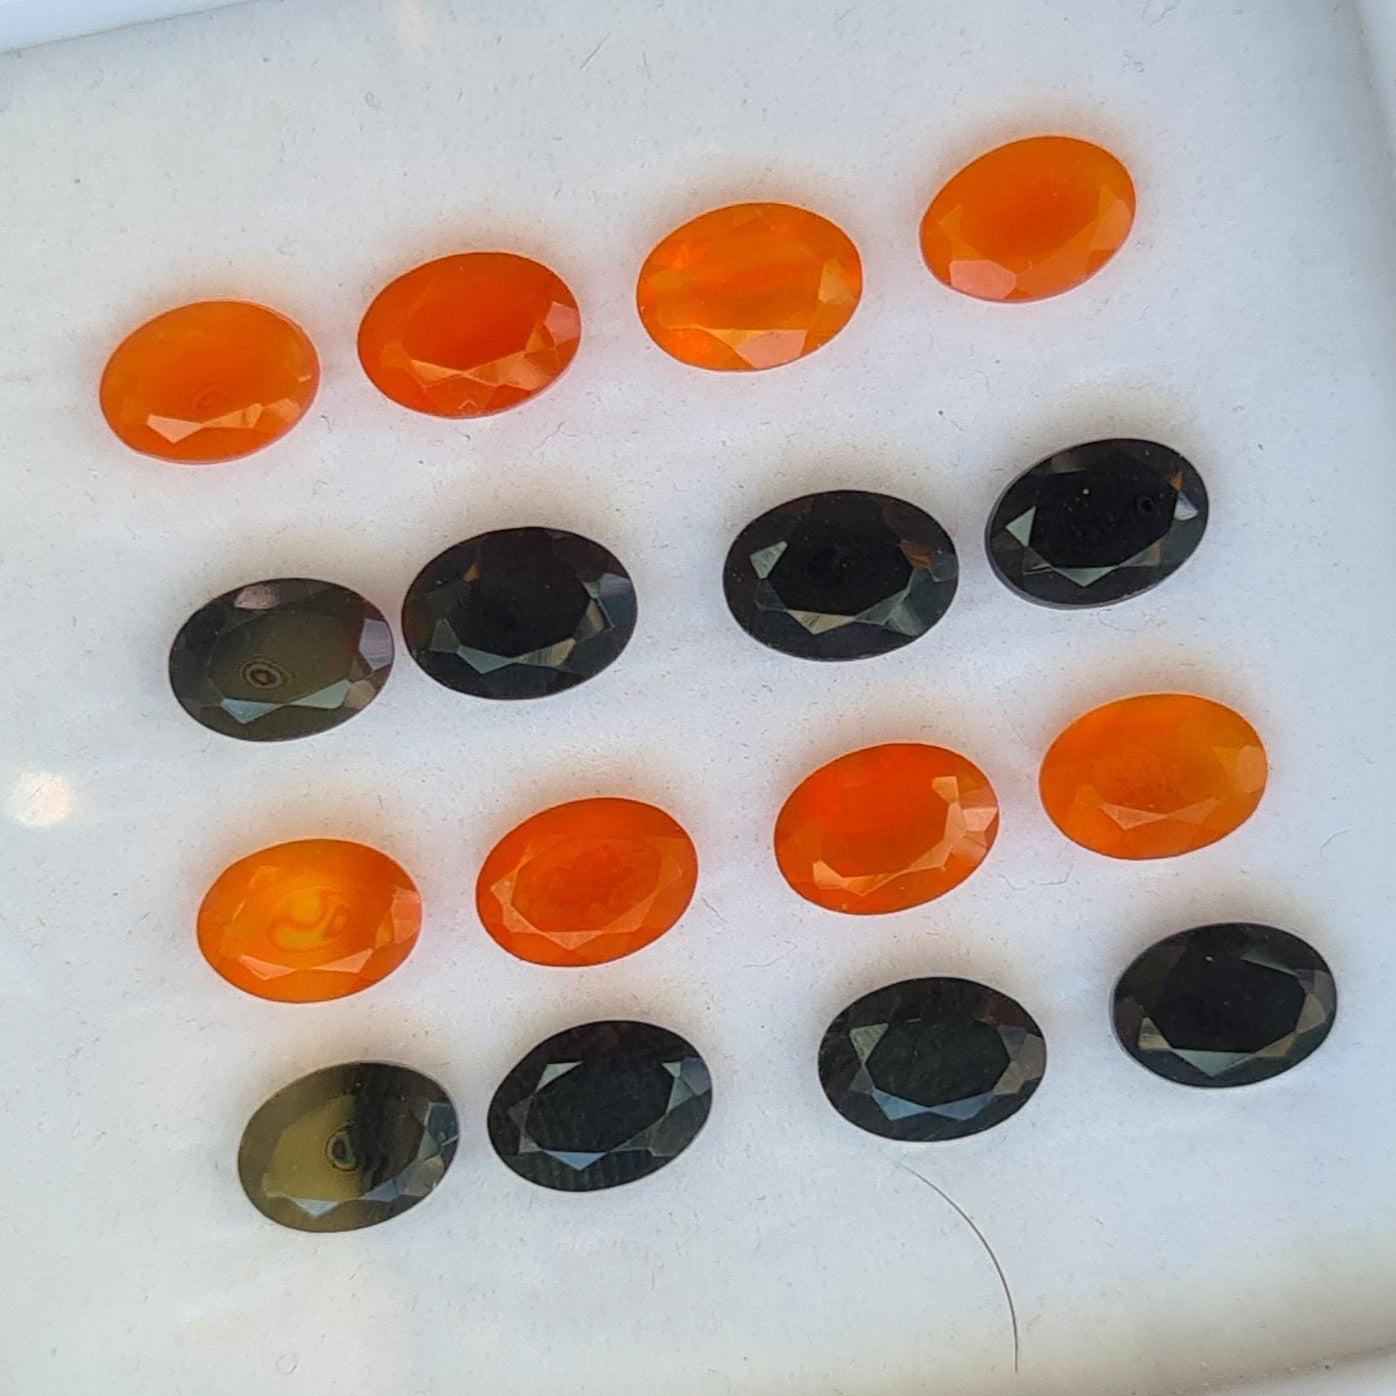 16 Pcs Natural Mix Faceted Gemstone Oval Shape, Size 7x5mm , 10.7 Cts - The LabradoriteKing